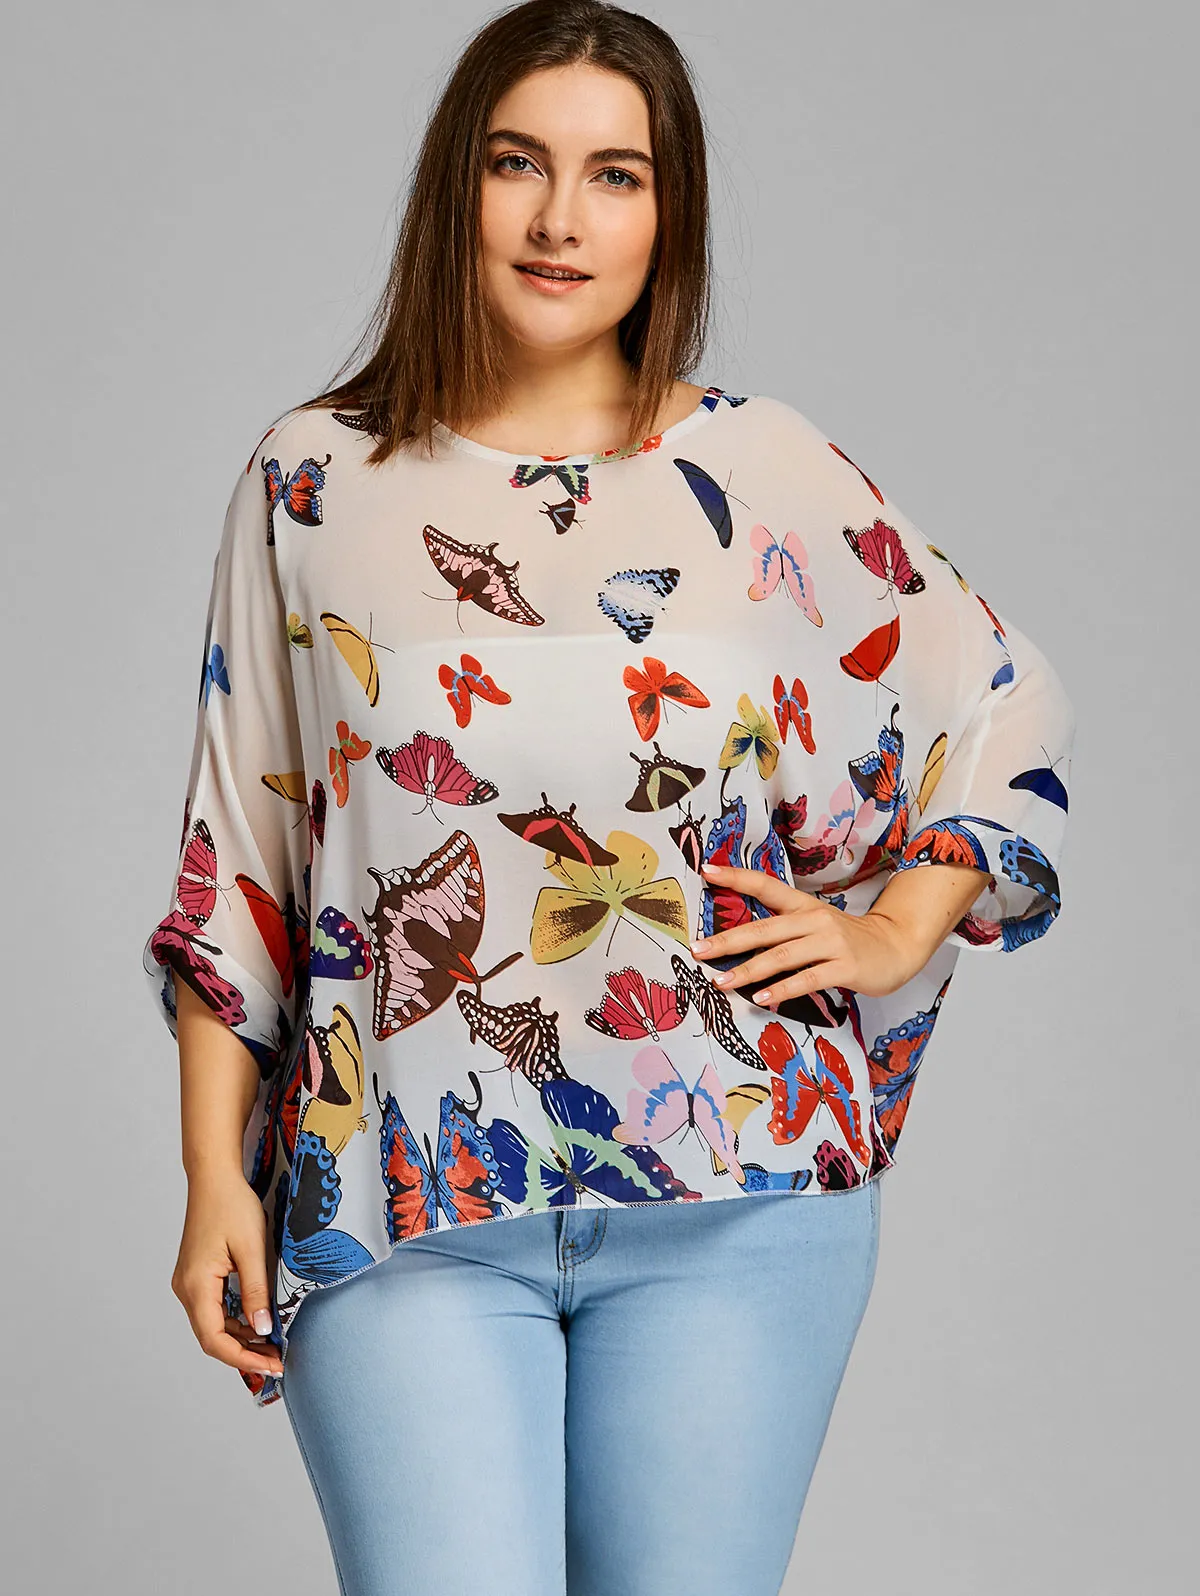 Gamiss Womens Butterfly Print Chiffon Blouse Plus Size, Casual